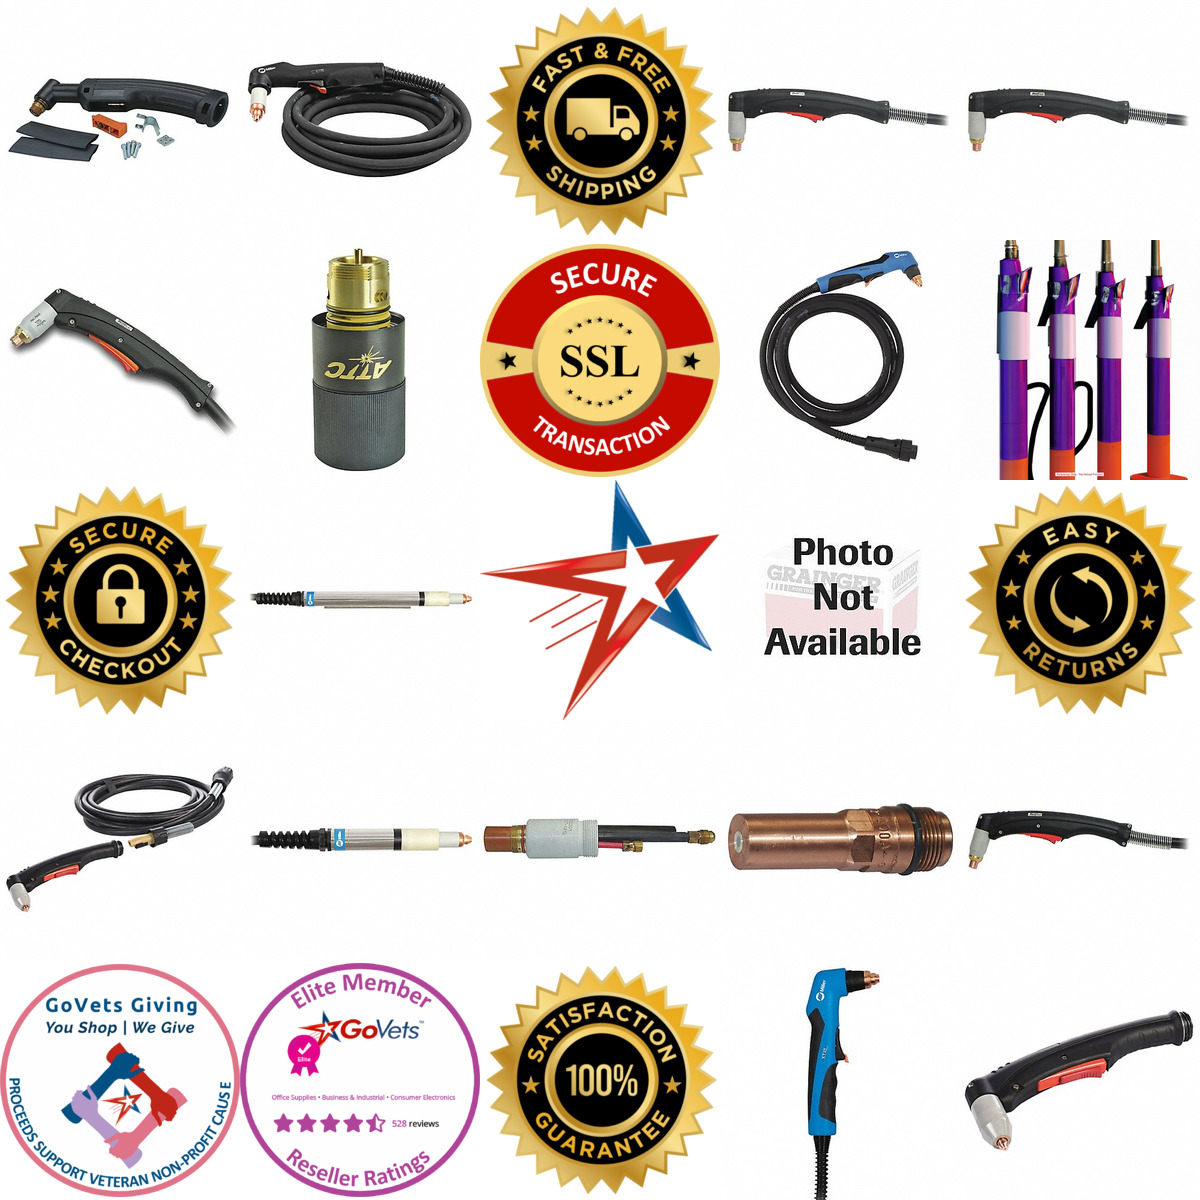 A selection of Plasma Torches products on GoVets